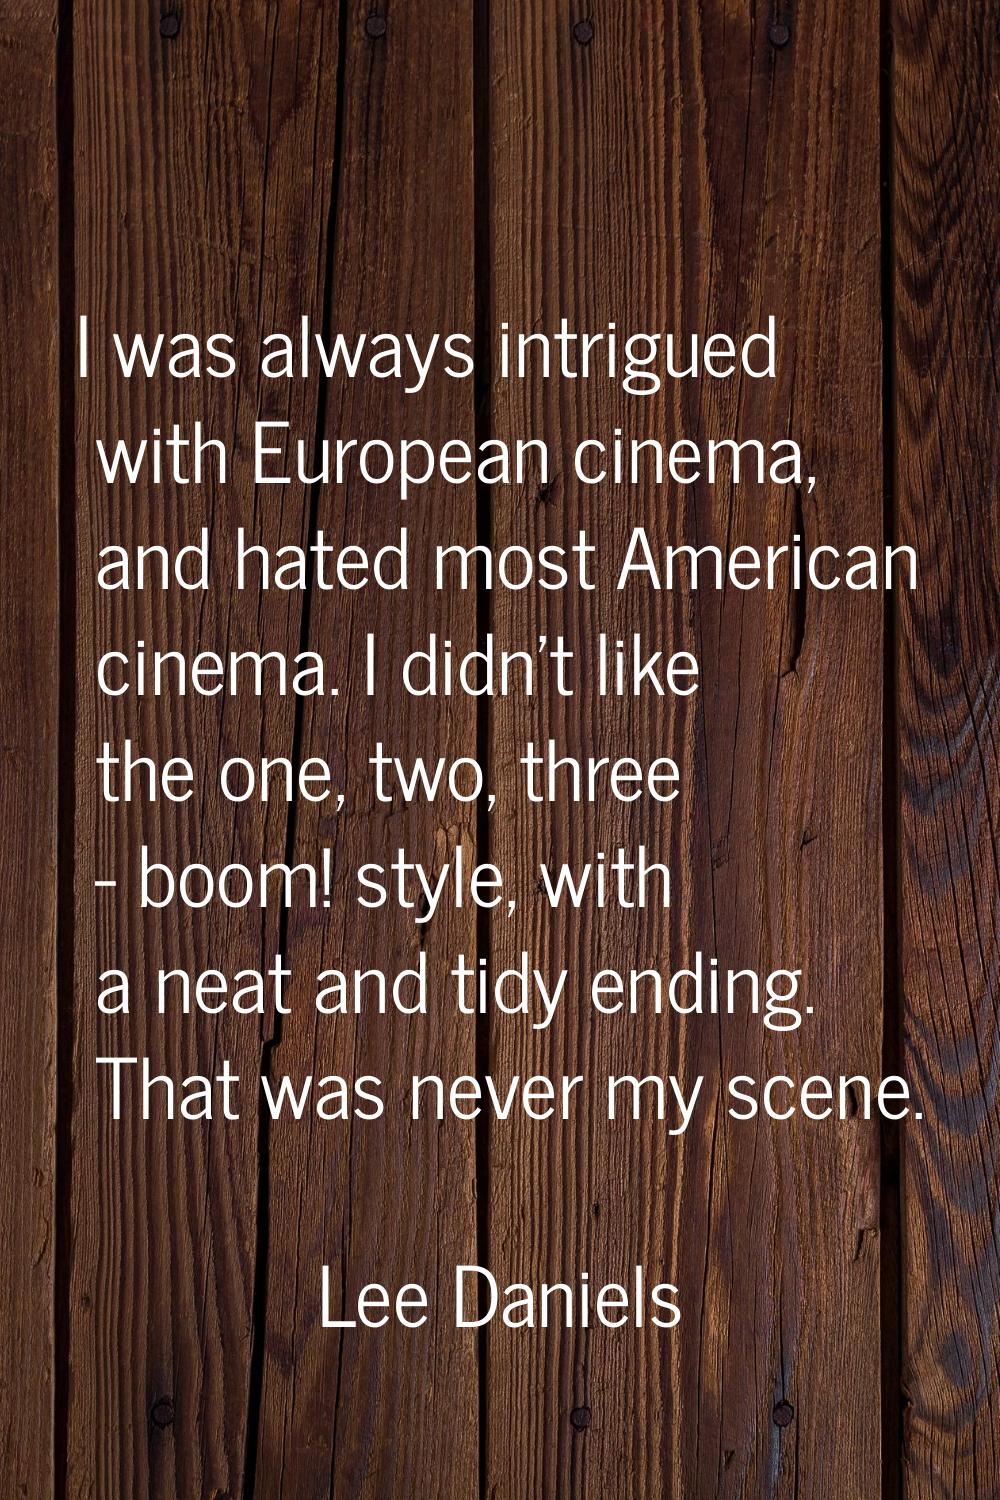 I was always intrigued with European cinema, and hated most American cinema. I didn't like the one,